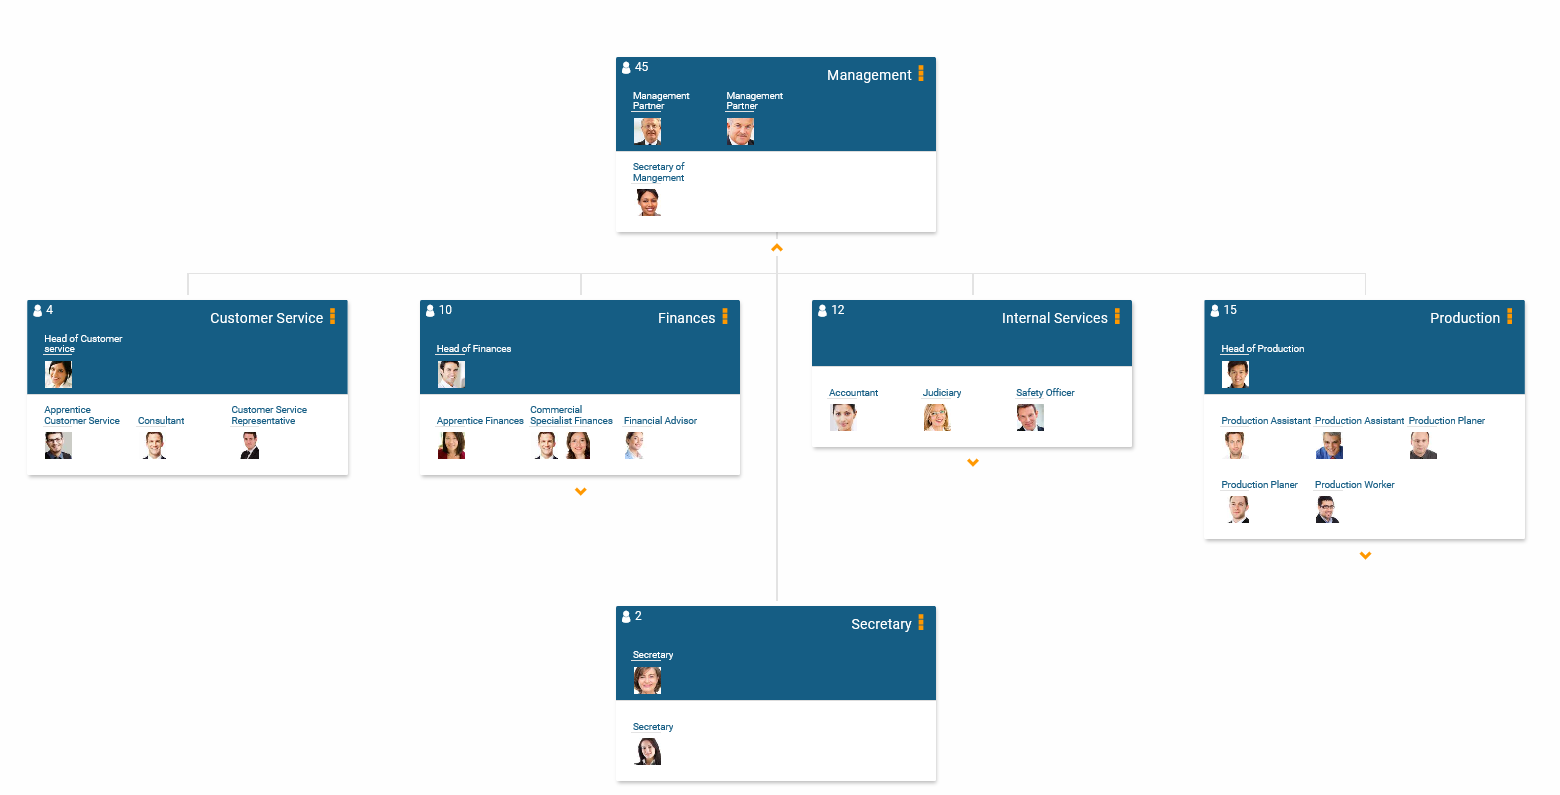 Org chart shows employee in all departments he is assigned to